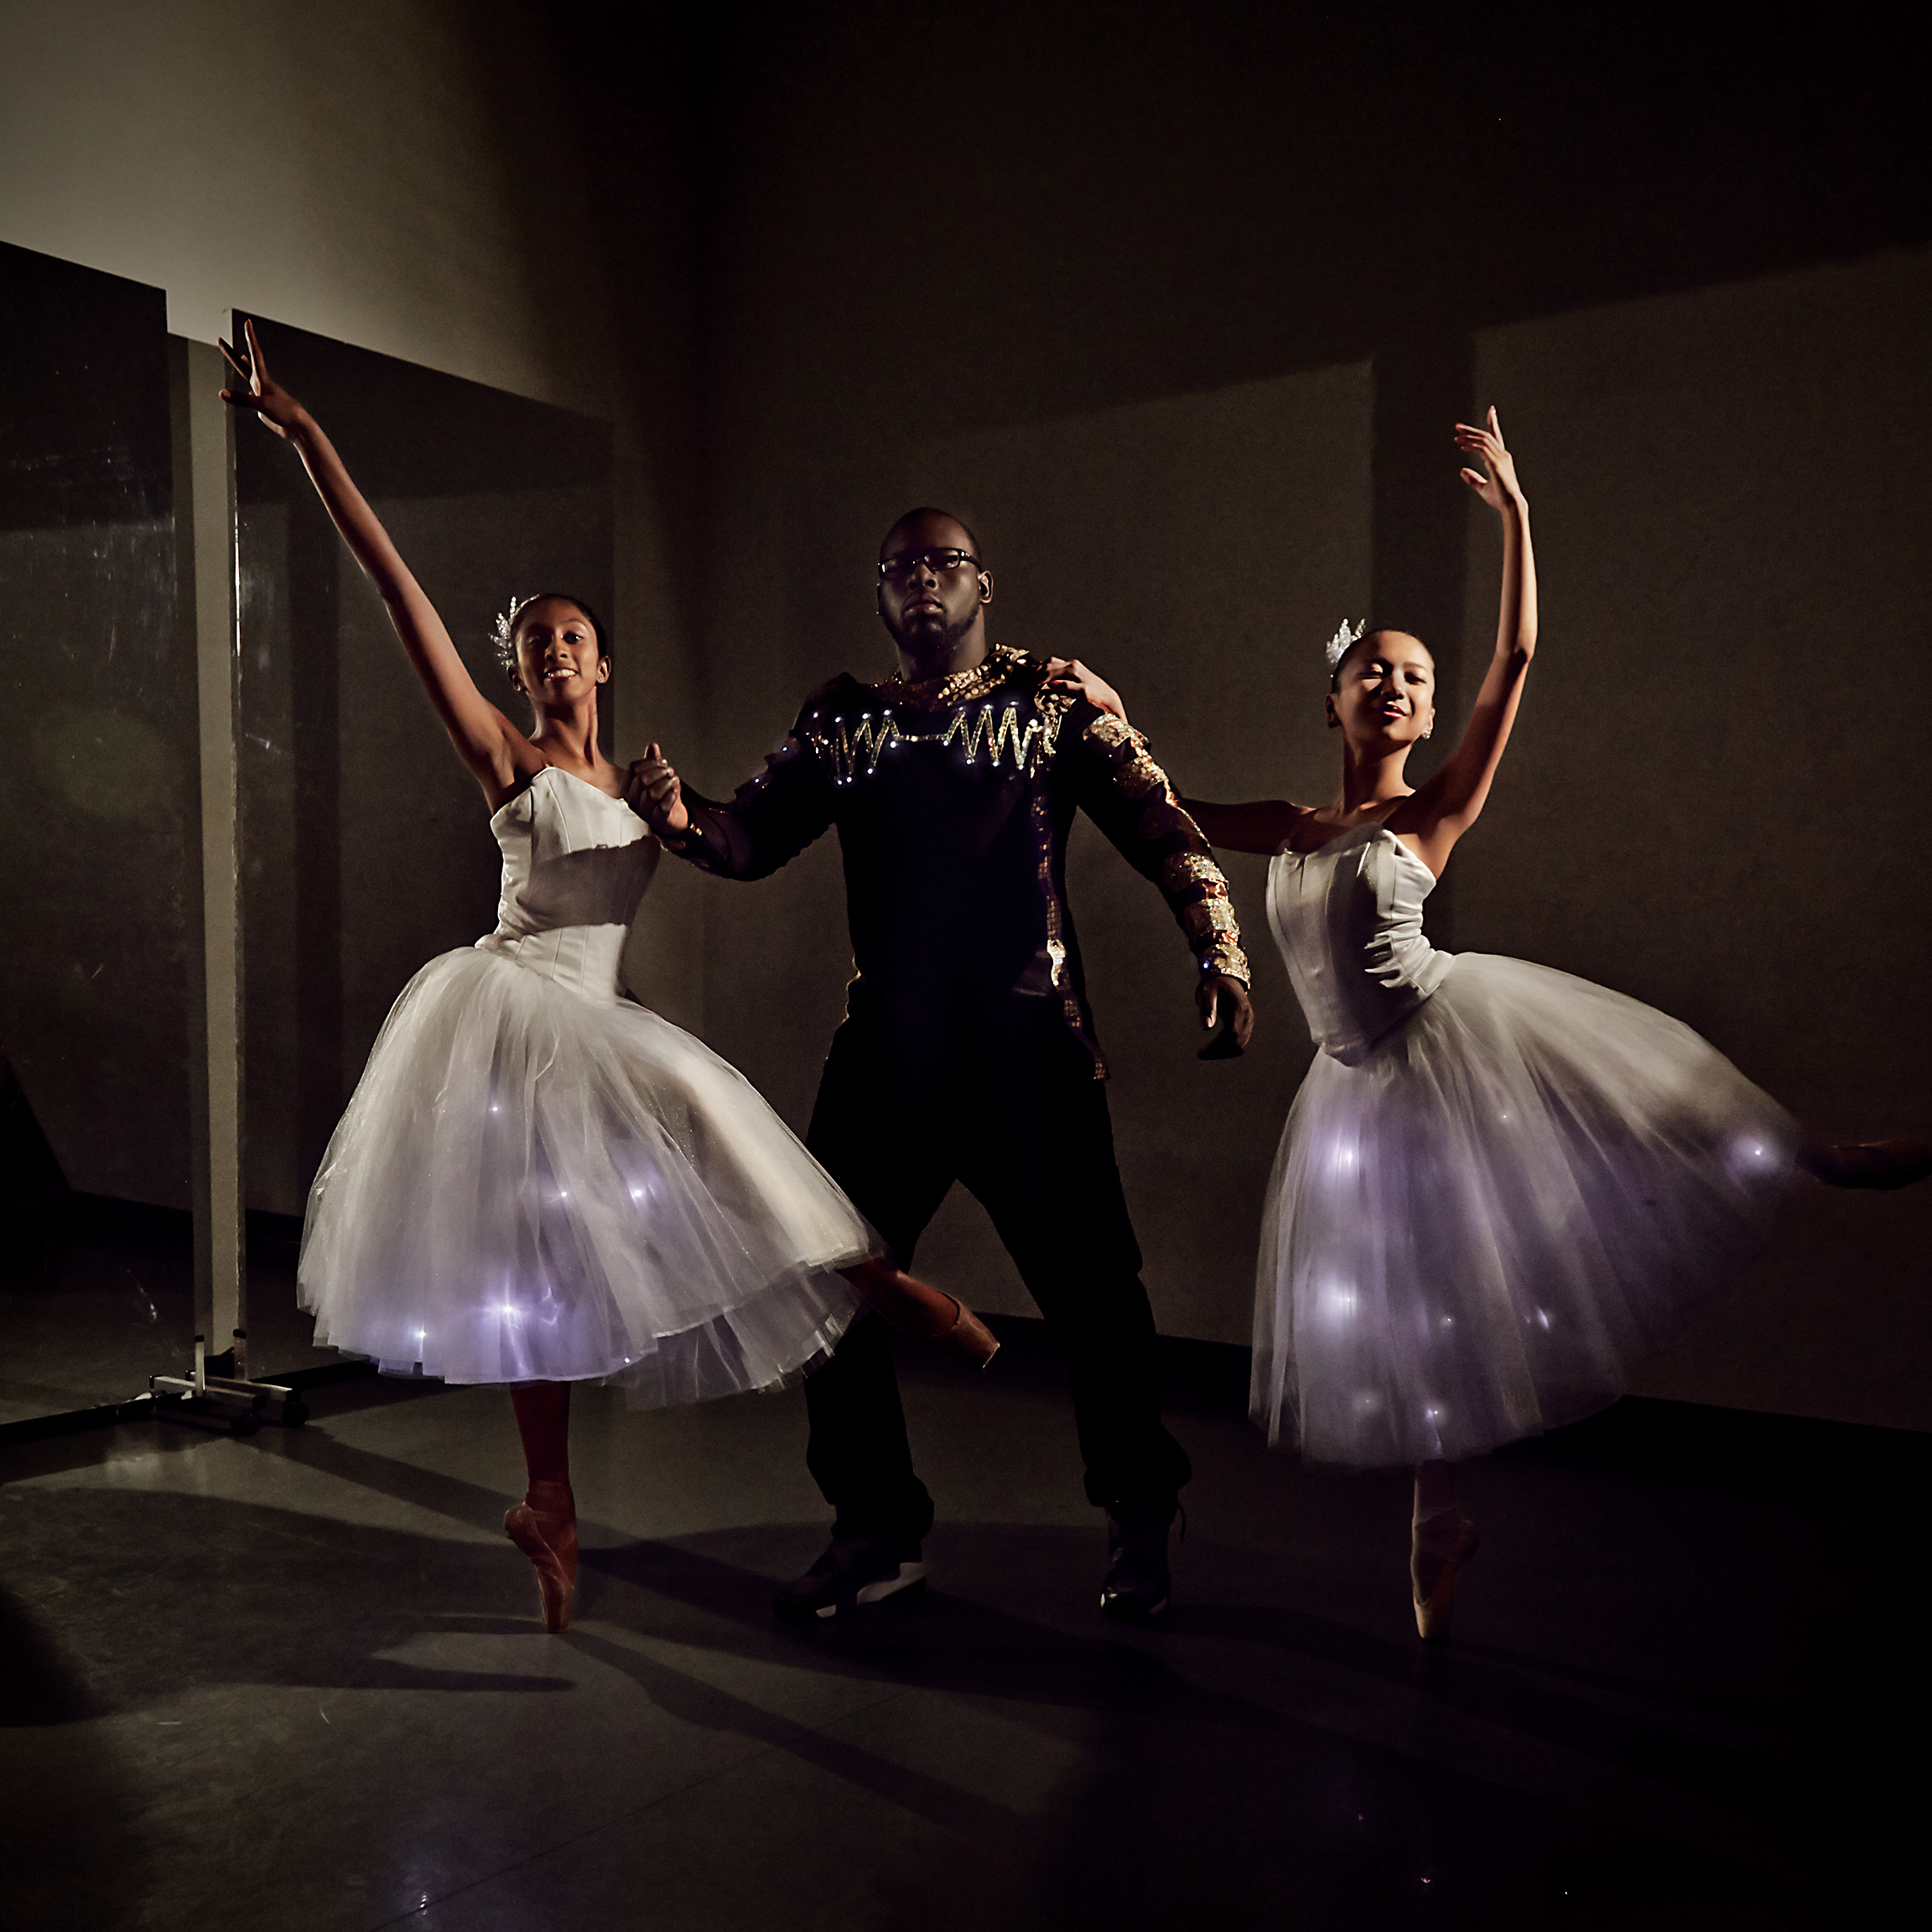 DIY Electrified Outfits Light Up The Ballet